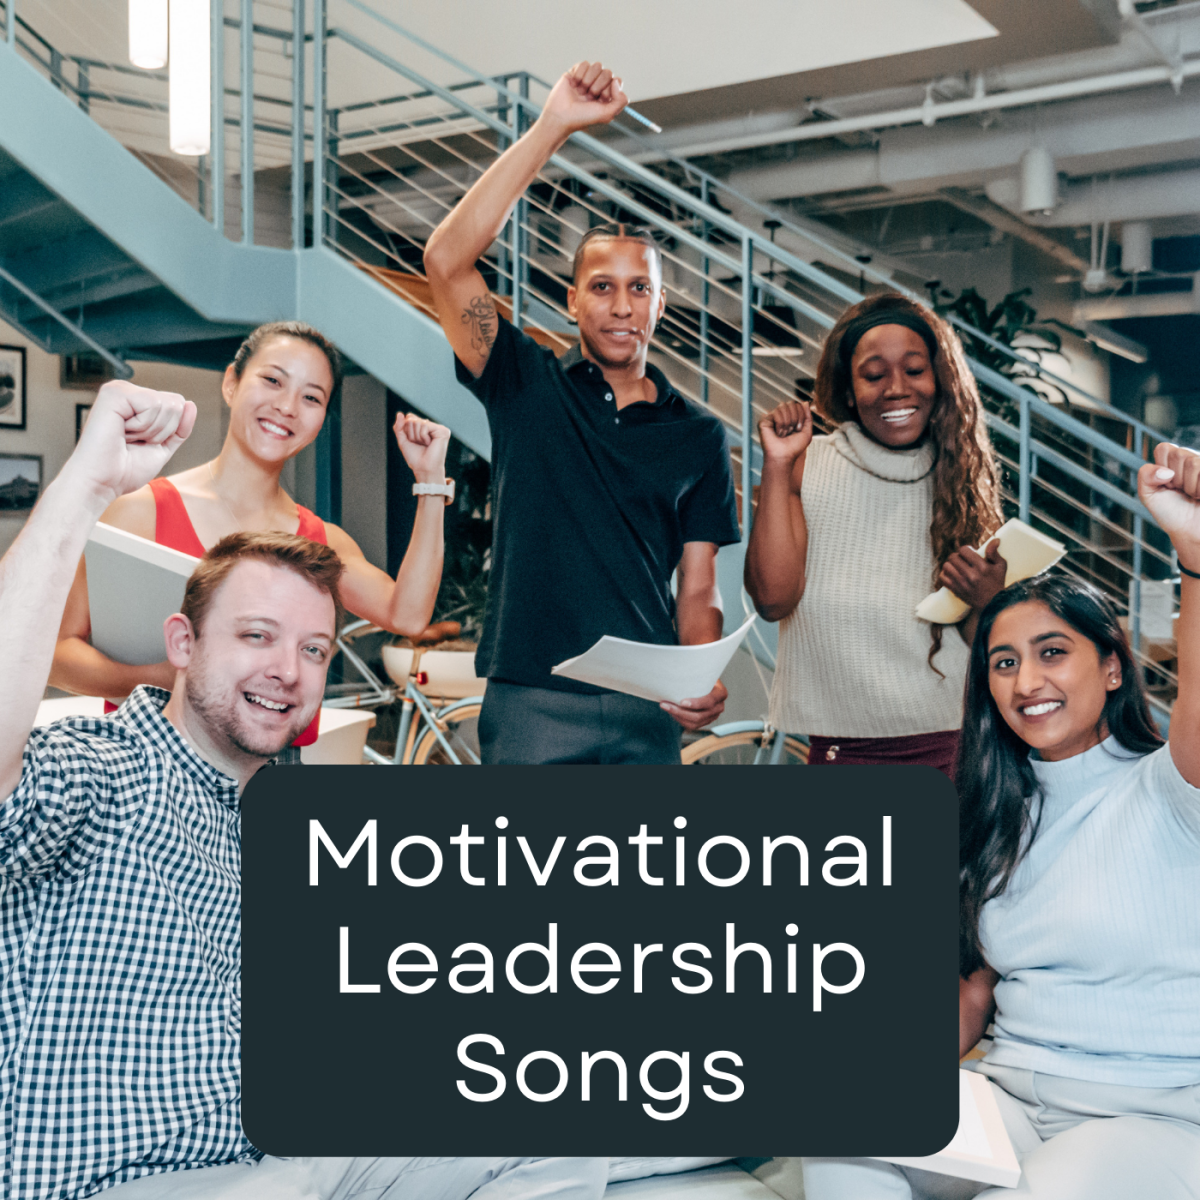 55 Motivational Leadership Songs - Spinditty